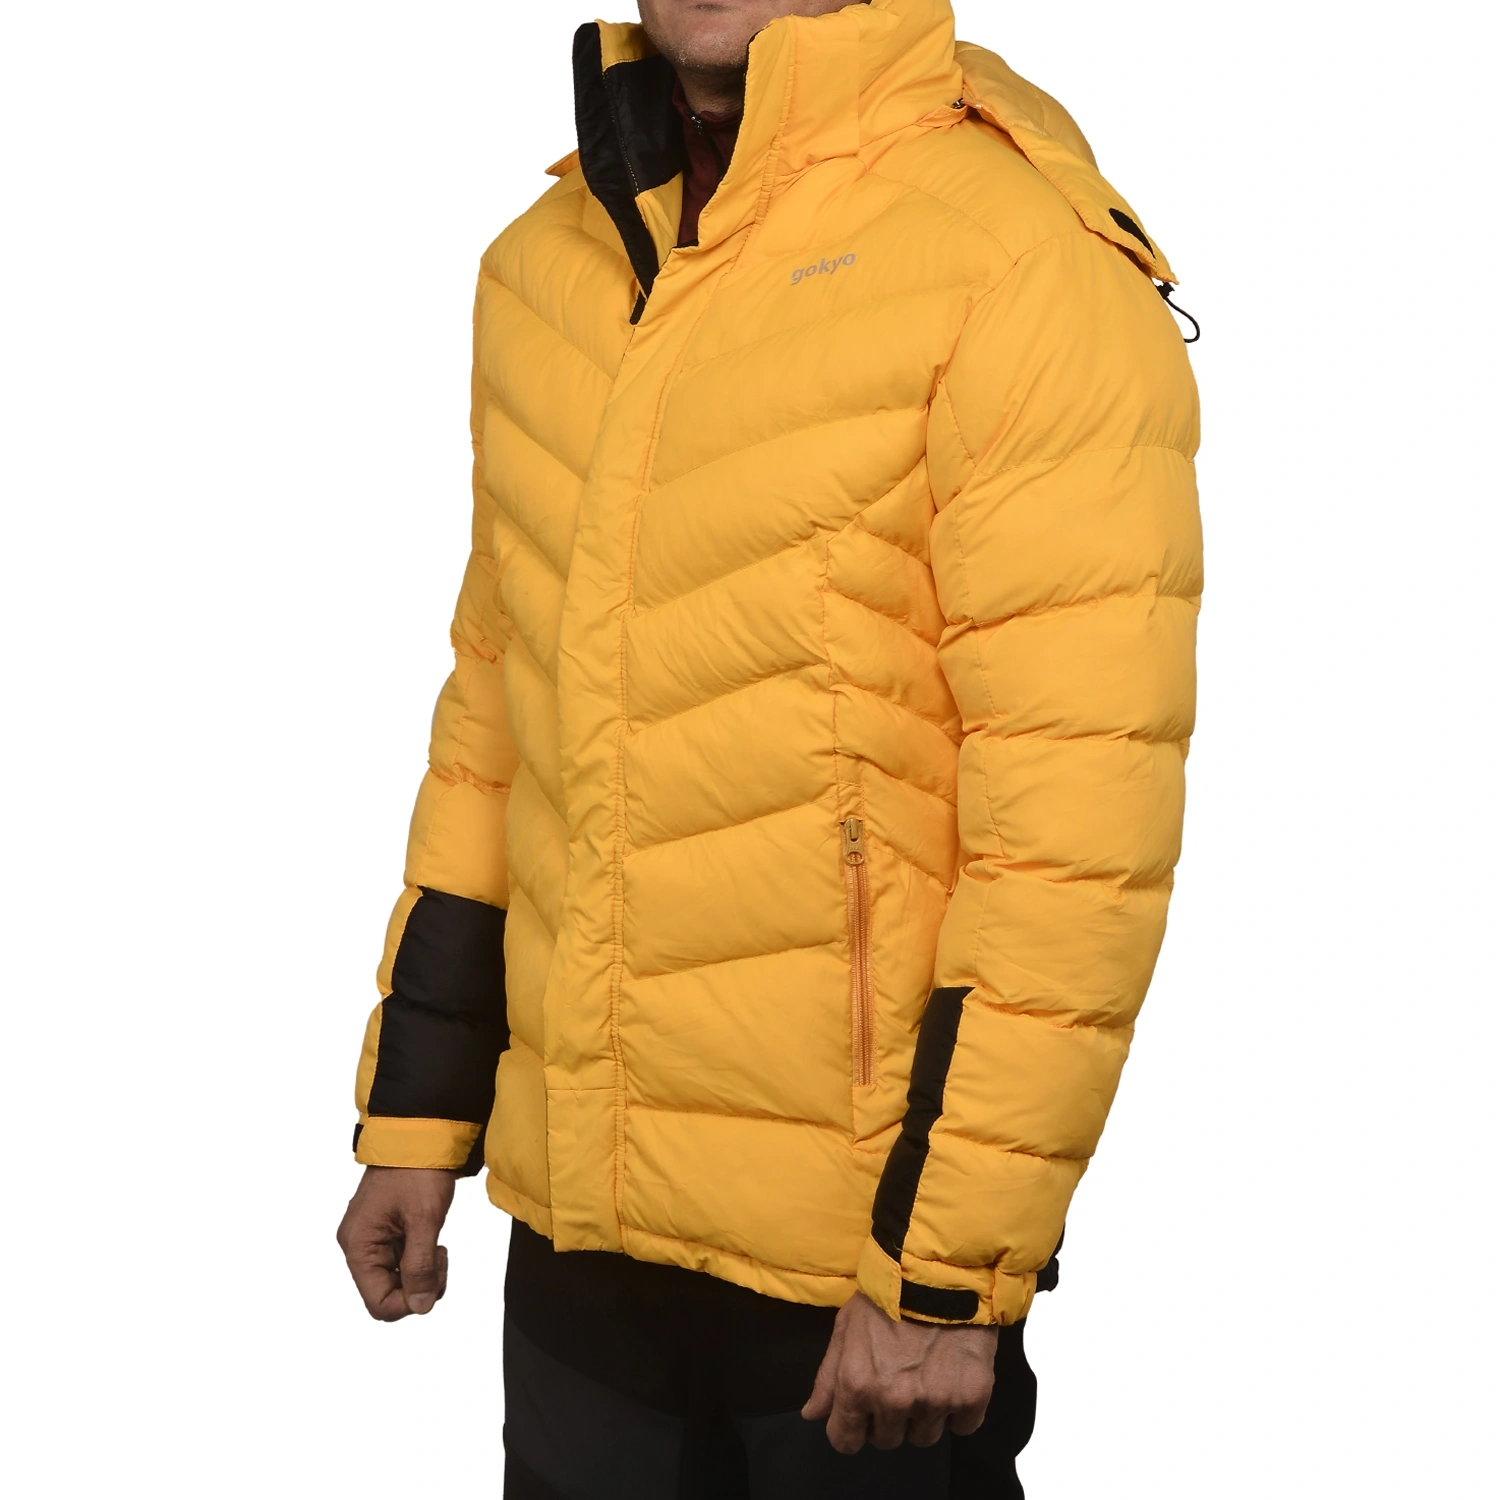 K2 Survivor Down Jacket for Men: Stylized Functionality for Extreme Cold Weather Expeditions (Up to -20°C)-XL-Yellow-2